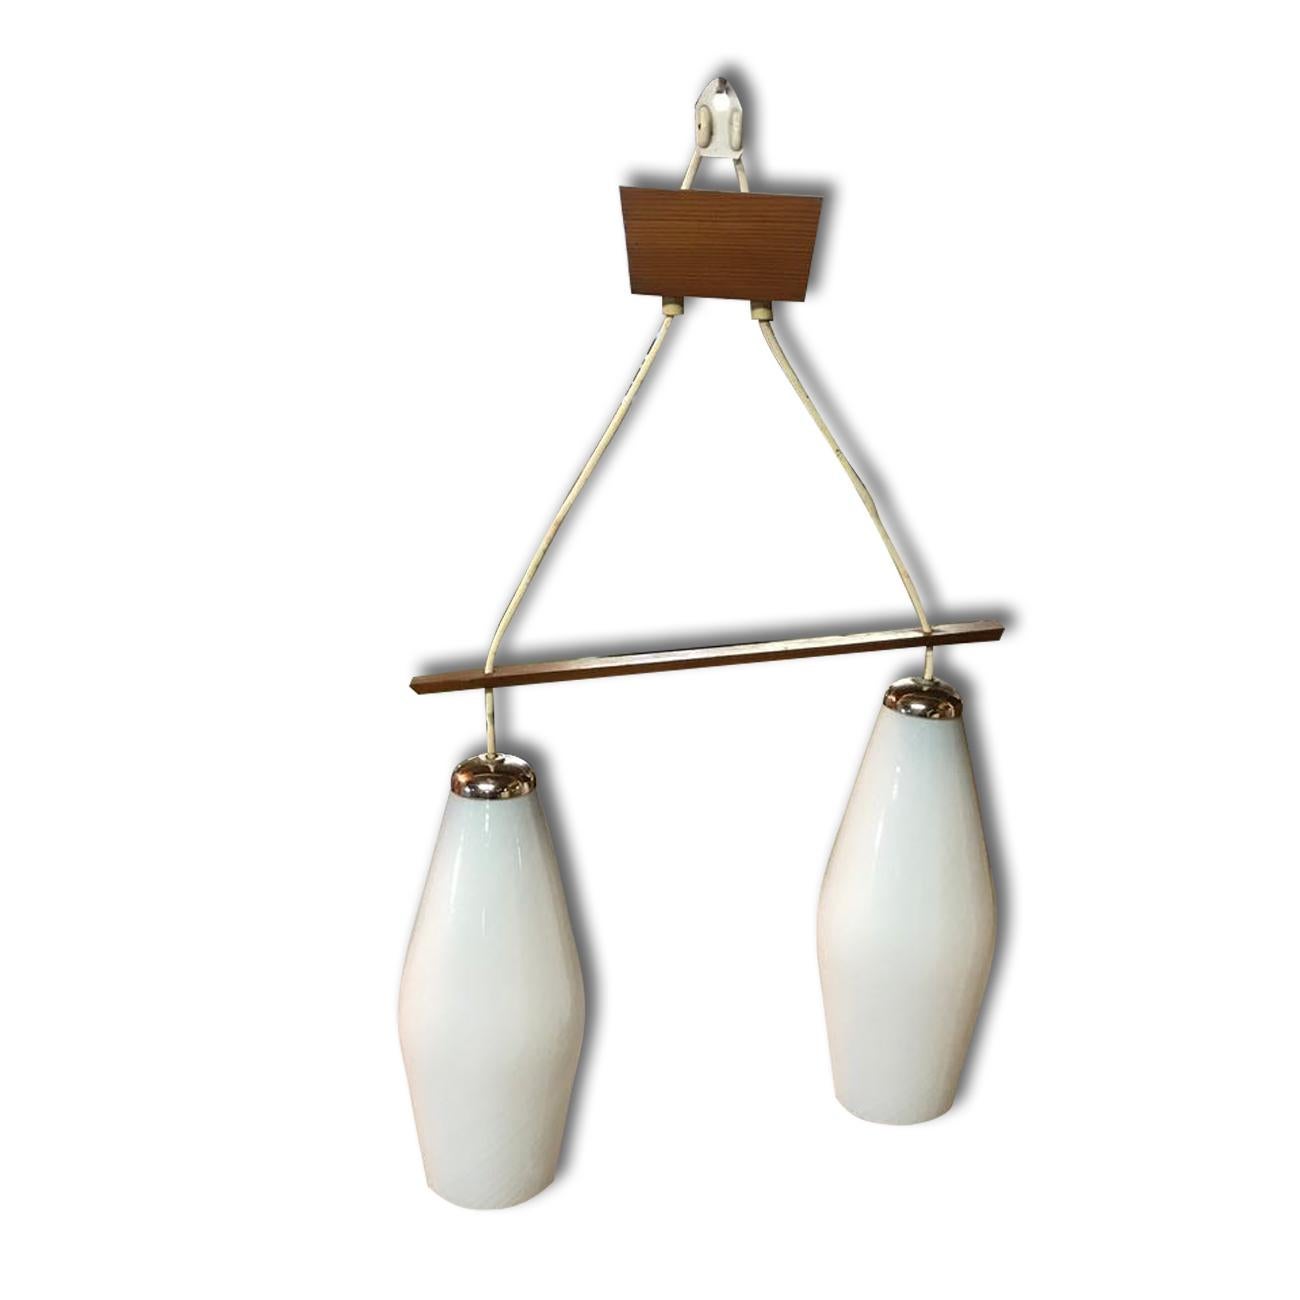 Vintage Danish style hanging chandelier, two milky glass lamshades hanging on 2 insulated electric cables with a wooden base. Original wiring, functionality has not been tested.

Very well preserved condition.
  